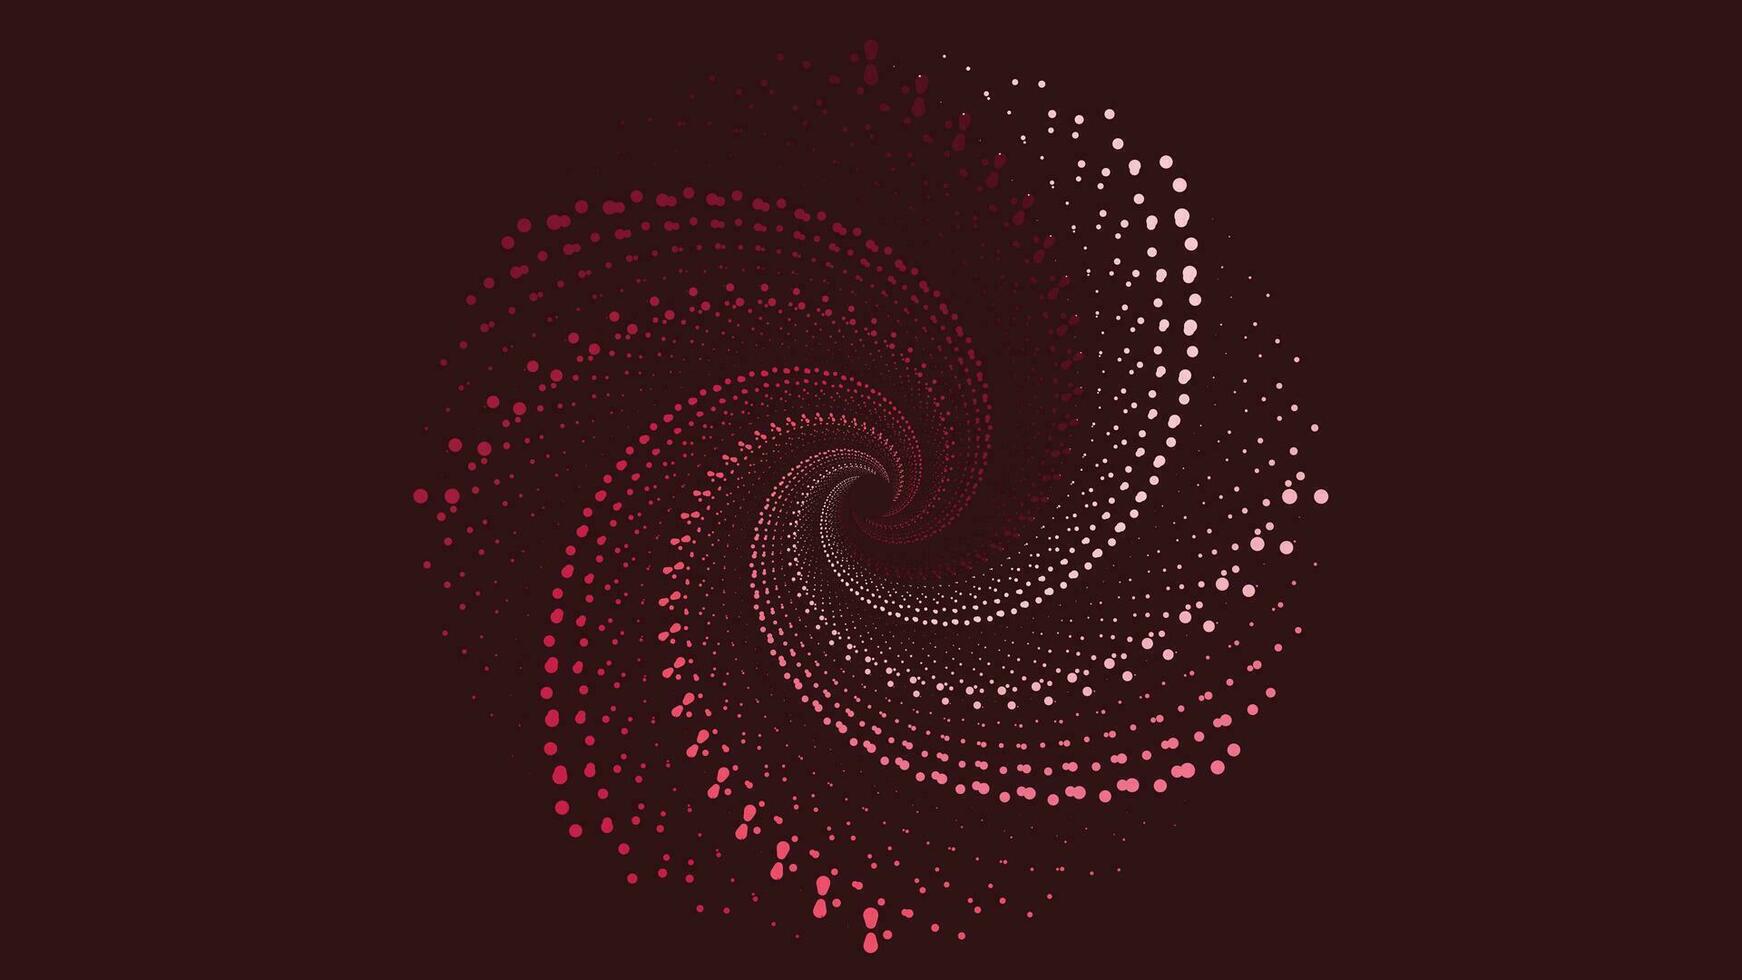 Abstract spiral vortex simple background for your creative project. vector